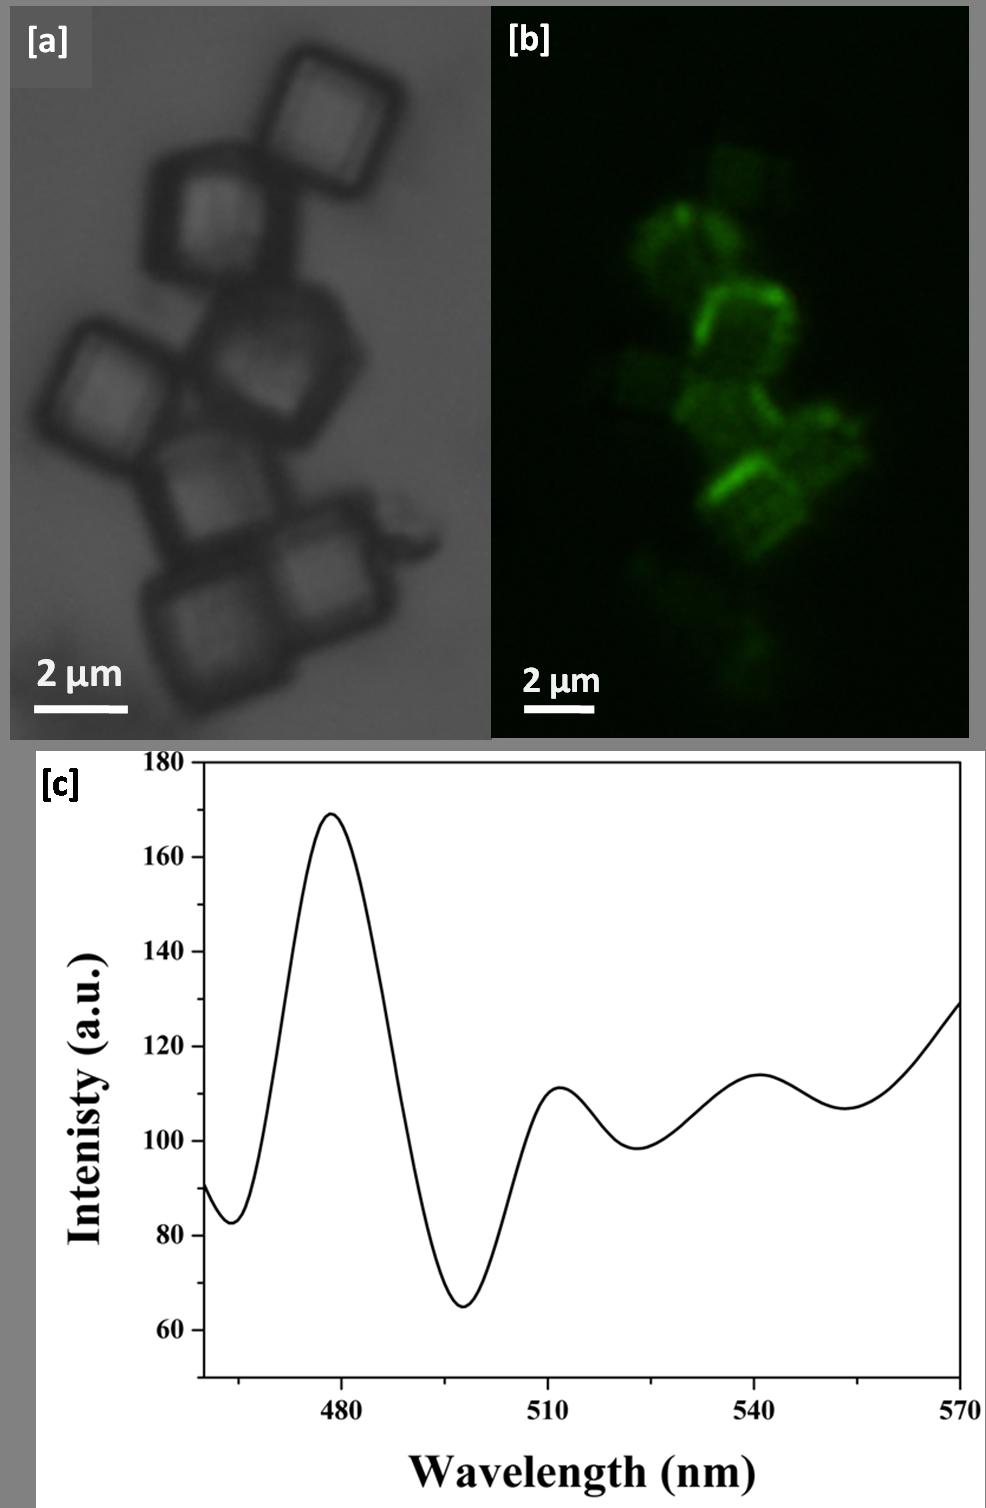 Post-synthetic modifications of metal-organic nanostructures (cage/cubes): 2 mg of [M(C 4 O 4 )(H 2 O) 2 ] n nanocubes or nano were immersed in 2 ml of ethanol solution containing OPV-NH 2 (0.